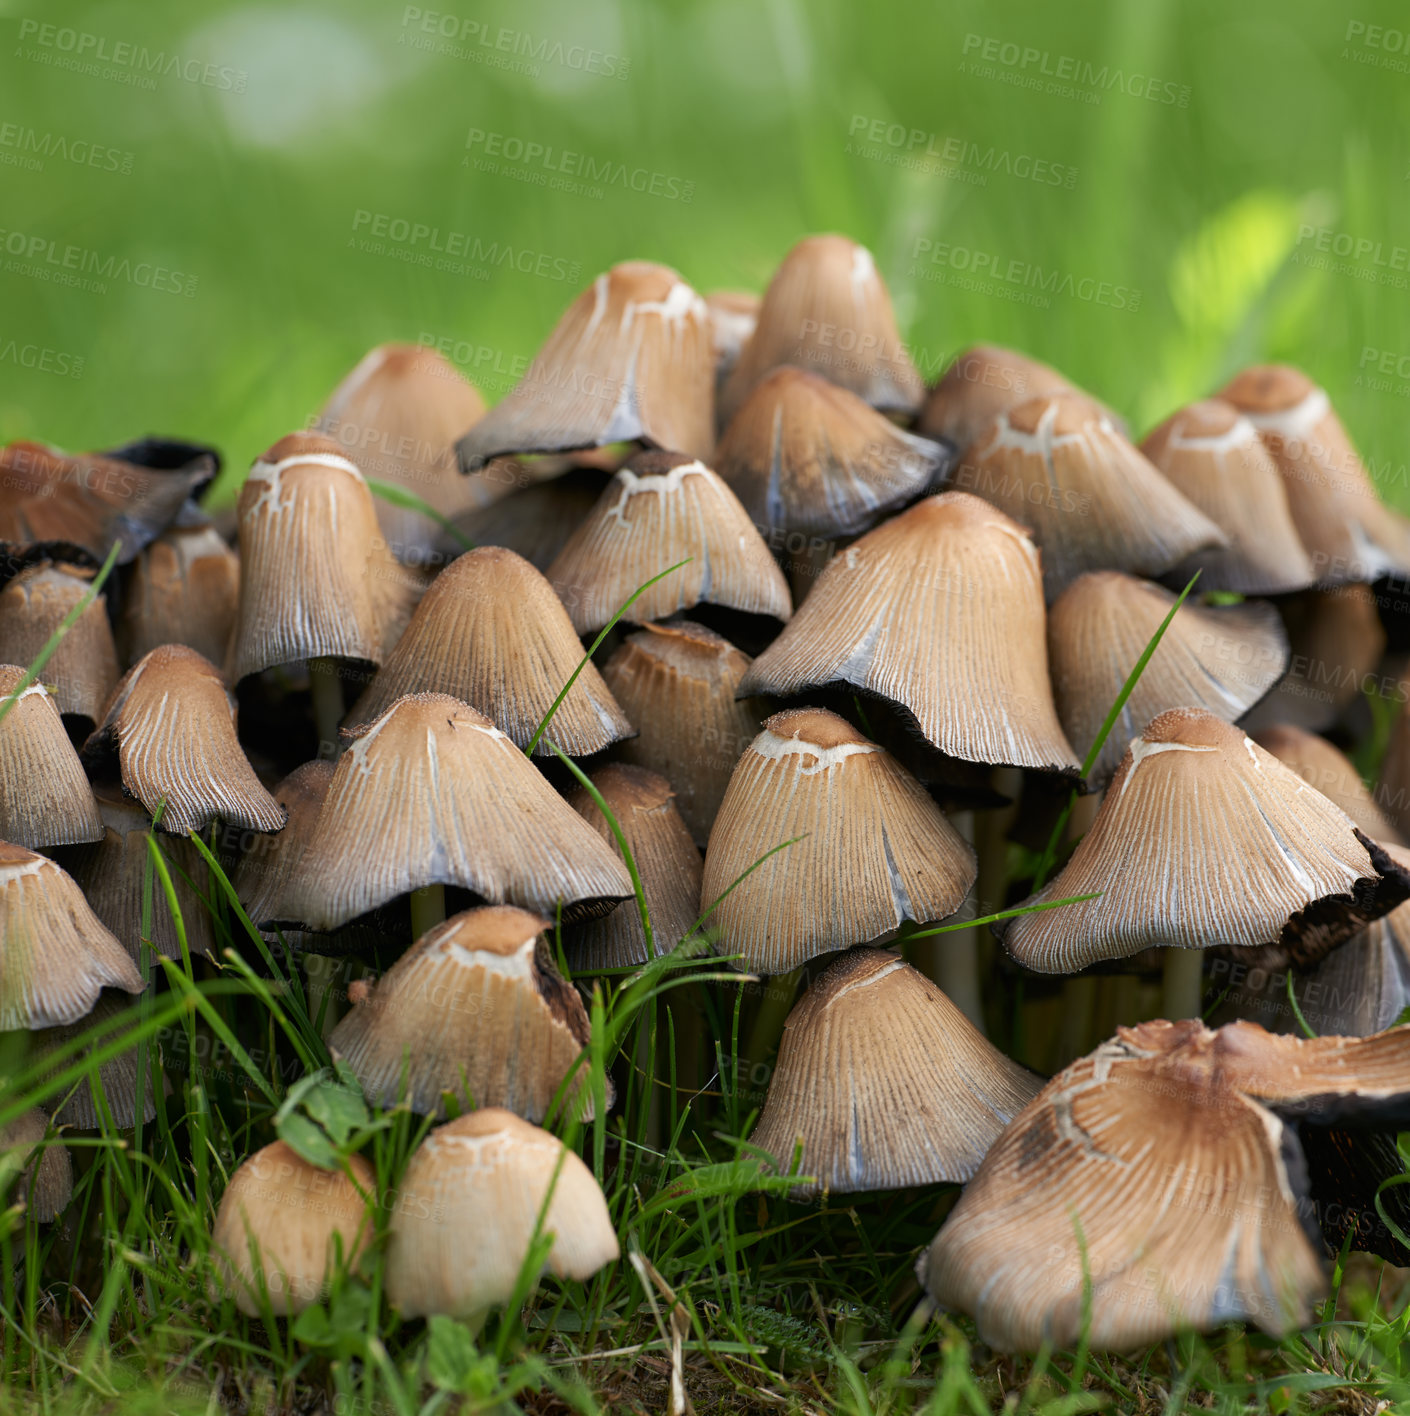 Buy stock photo Coprinopsis atramentaria, commonly known as the common ink cap or inky cap, is an edible mushroom found in Europe and North America.Coprinopsis atramentaria, commonly known as the common ink cap or inky cap, is an edible mushroom found in Europe and North America.